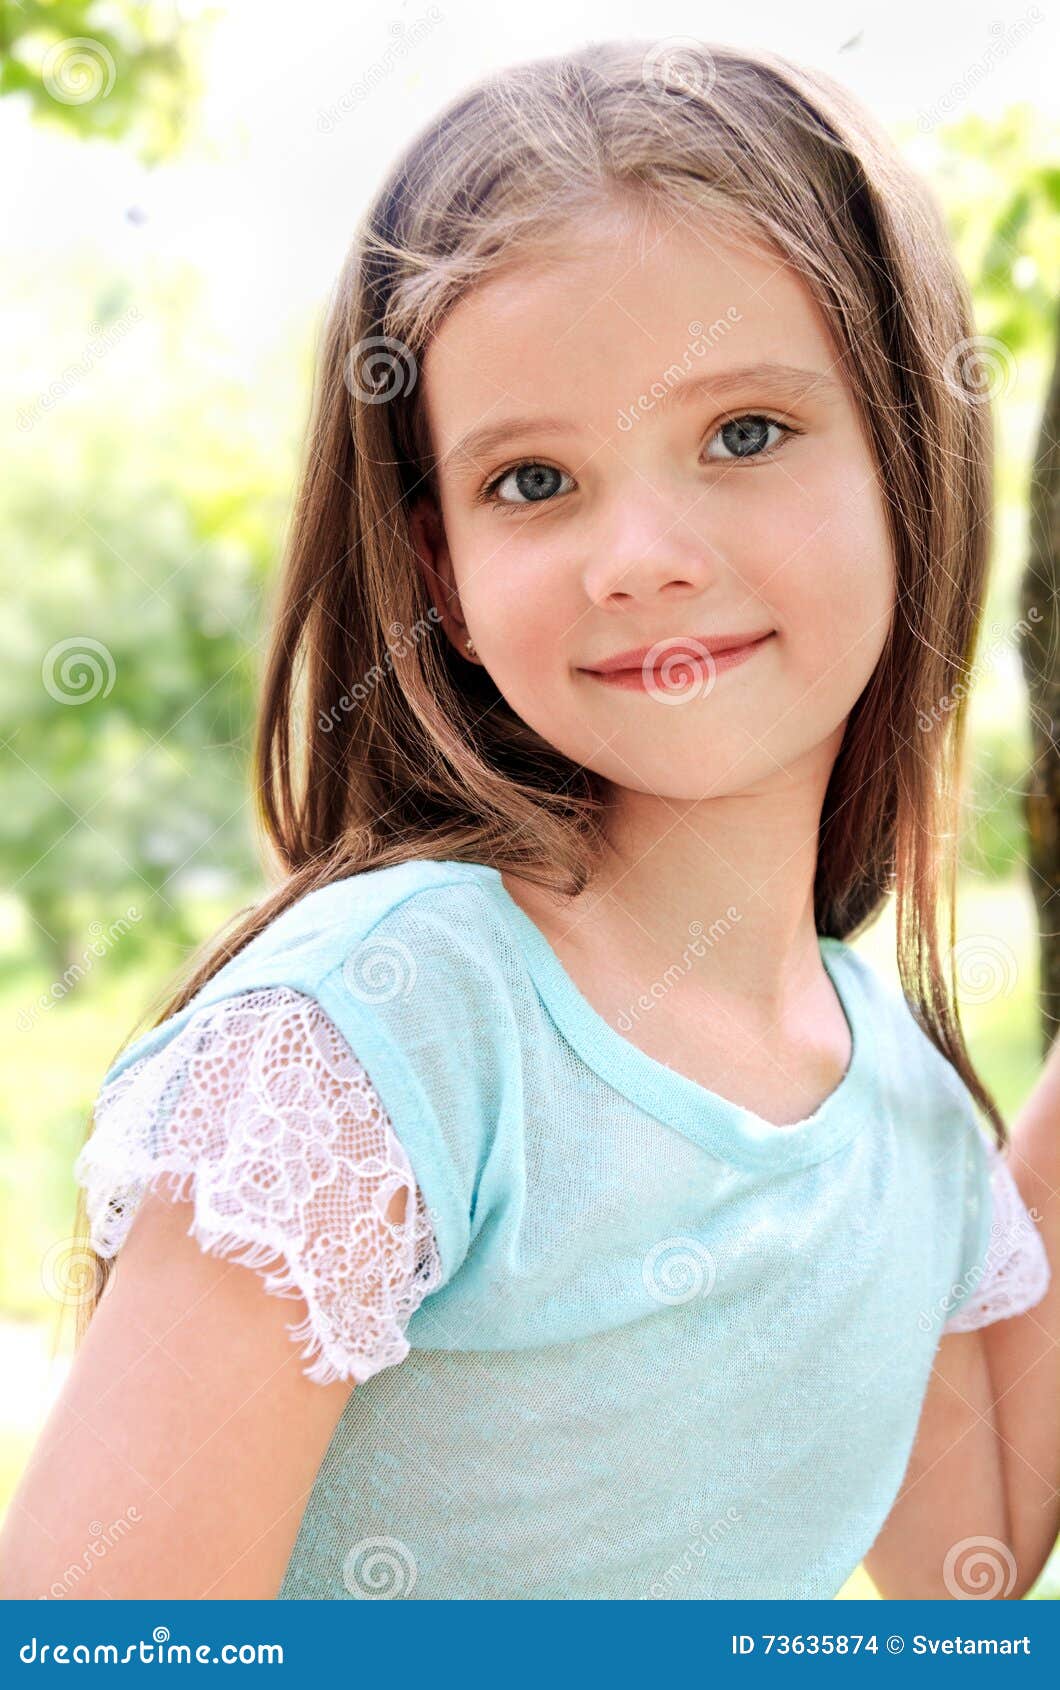 Adorable Smiling Little Girl in Summer Day Stock Photo - Image of park ...